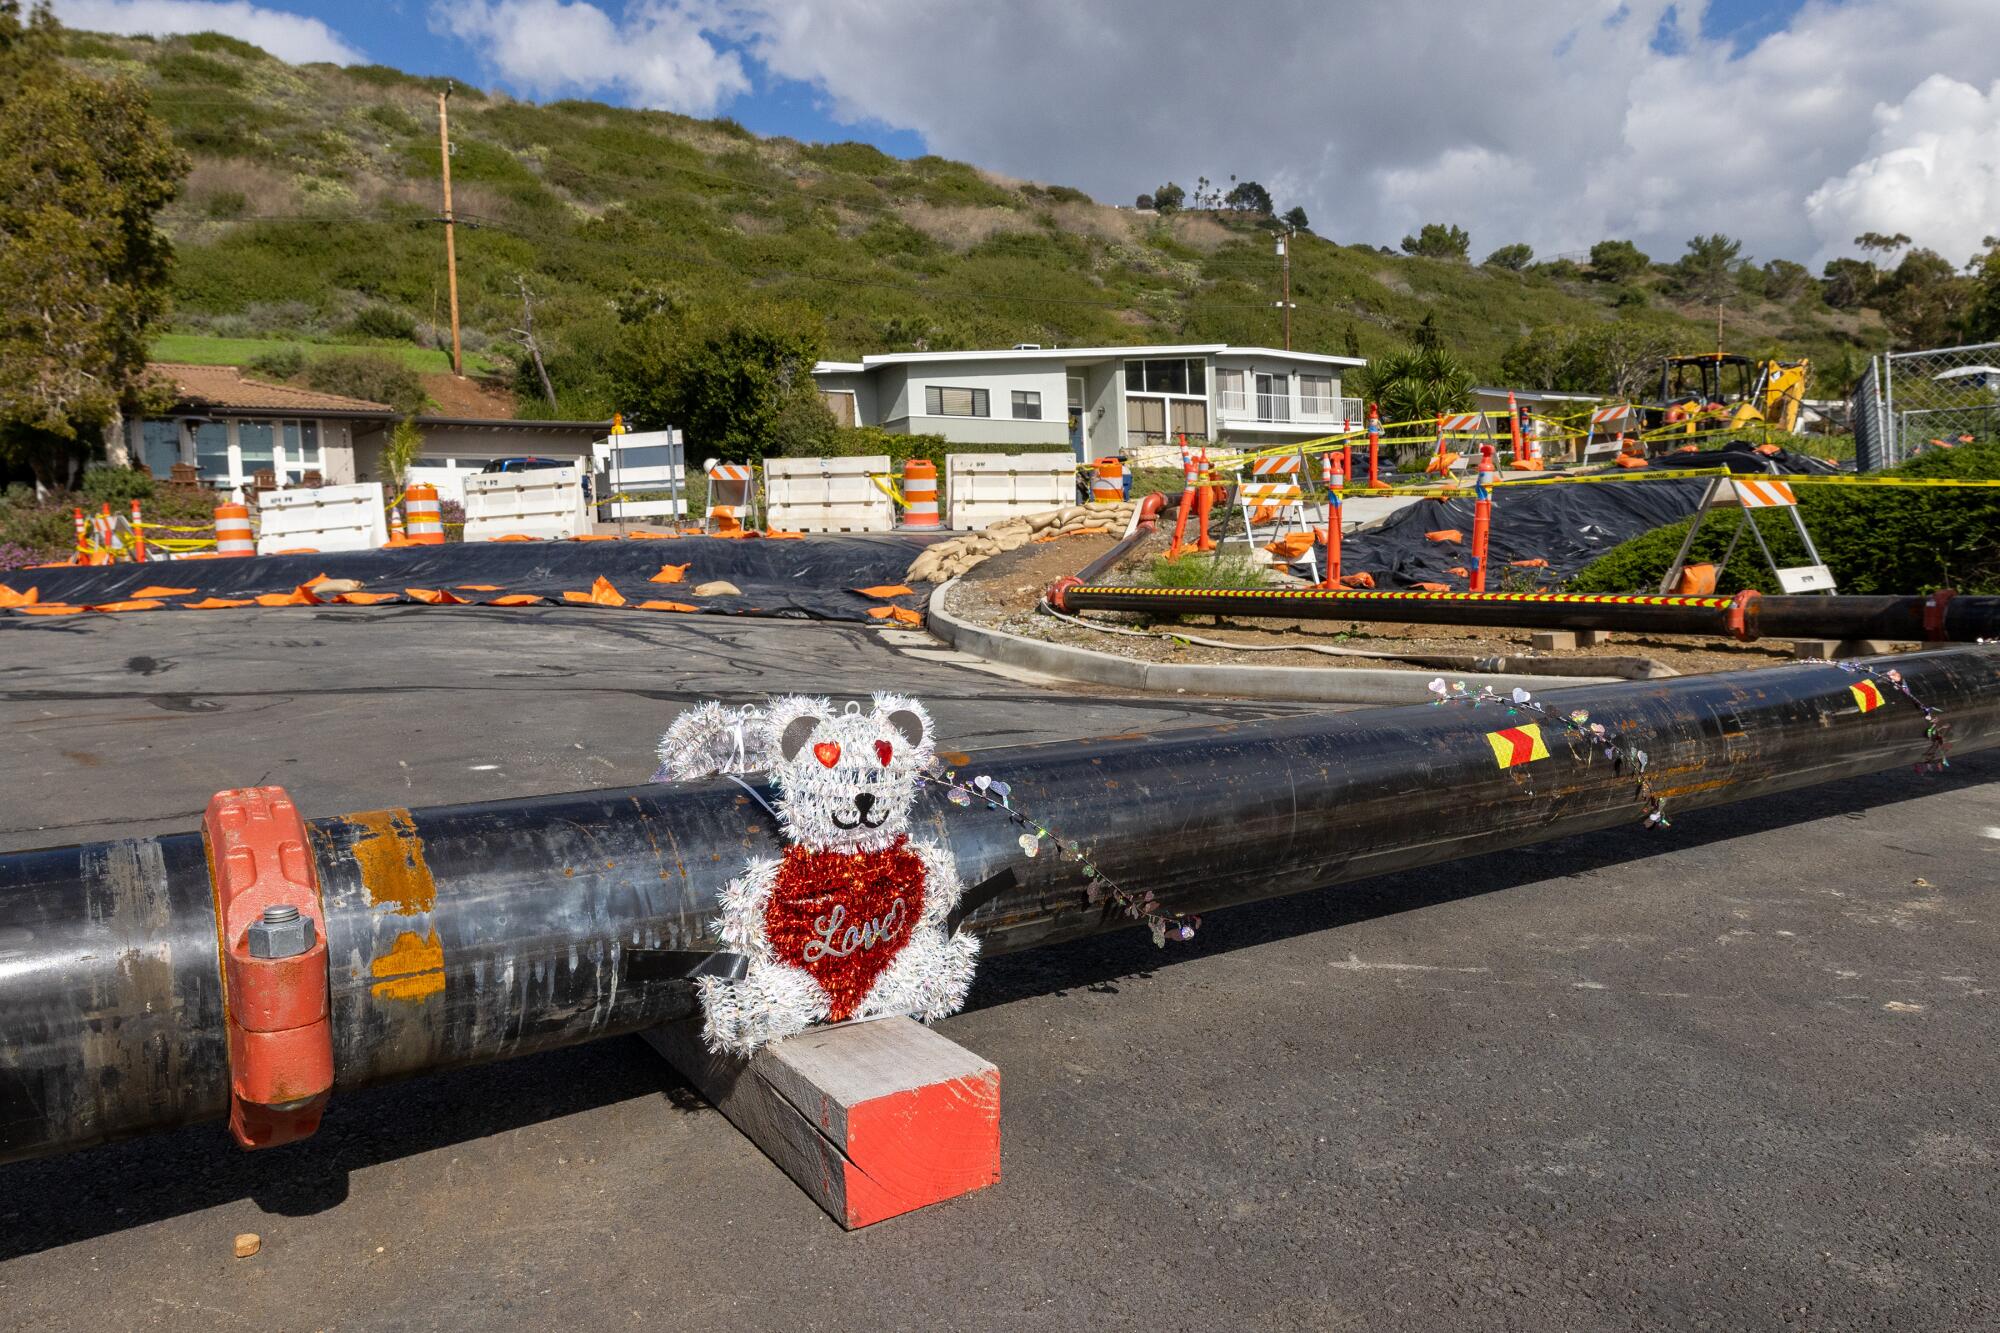  A teddy bear Valentine decoration is perched along rerouted water lines on a road with a grassy hill in the background.